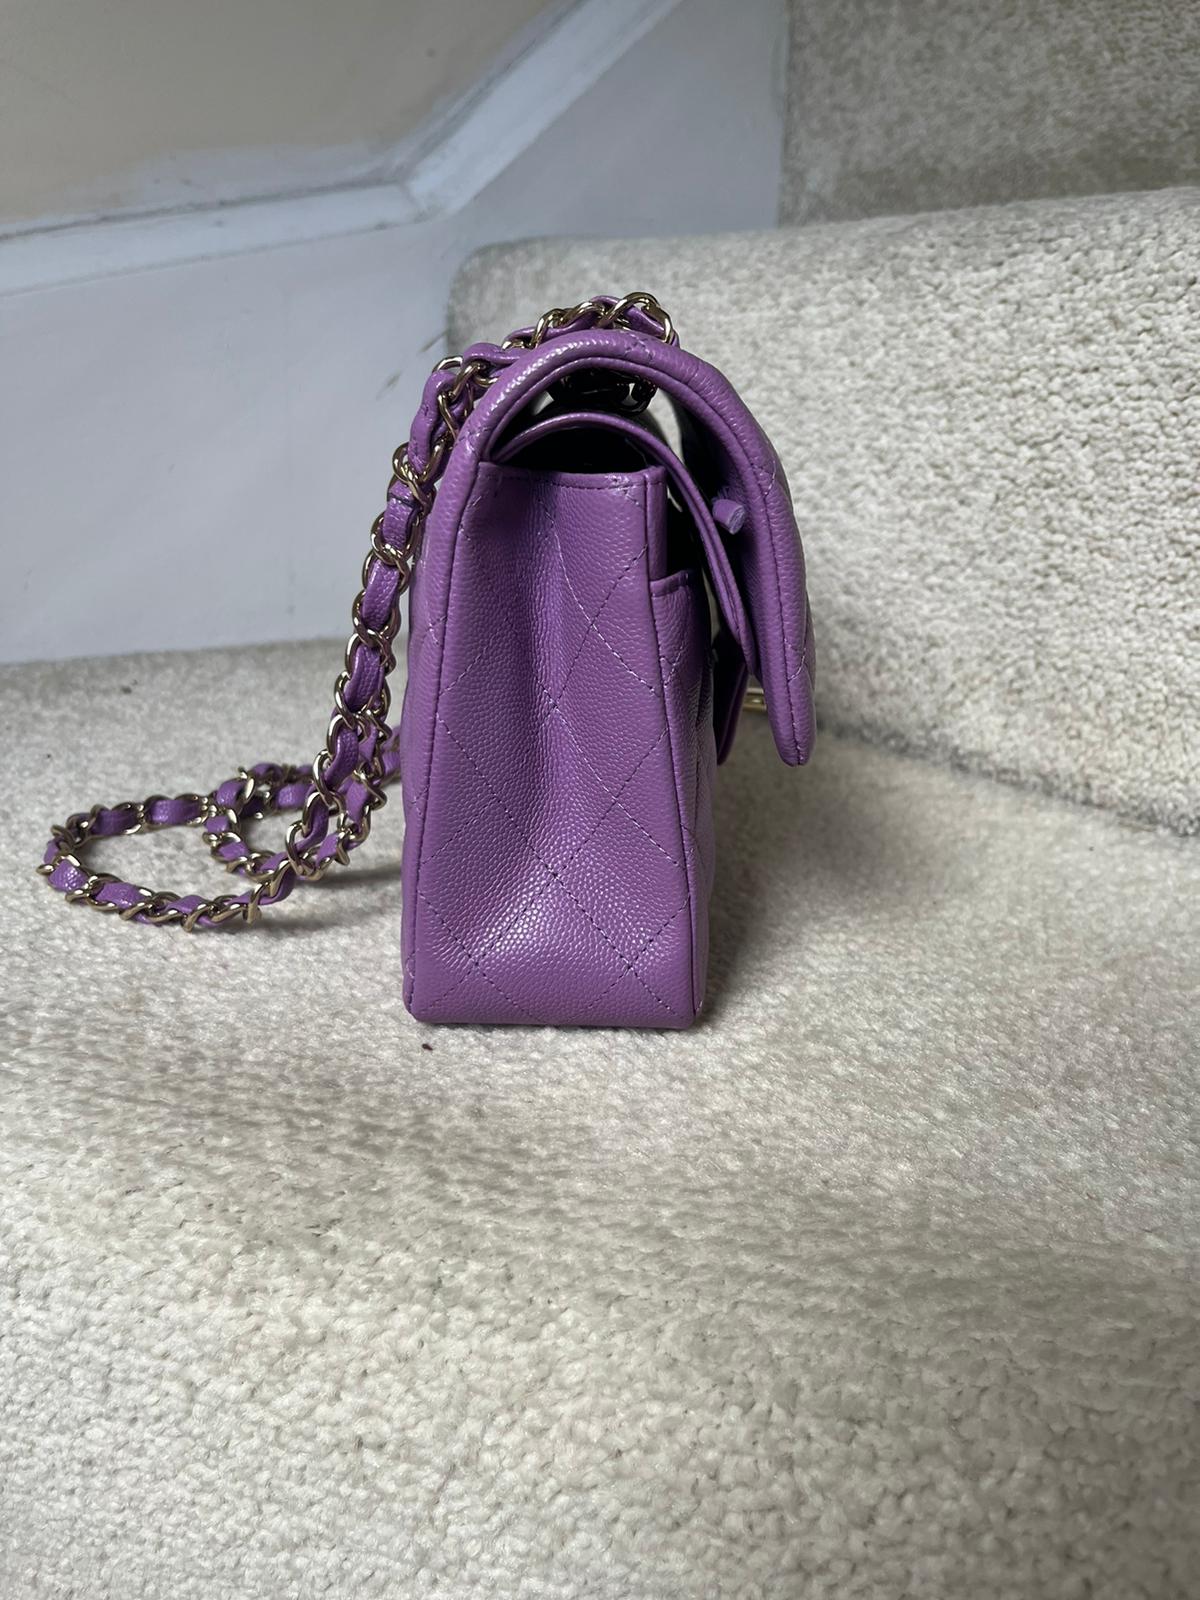 Shoulder bags Archives - Luxury consignment shop online Amsterdam